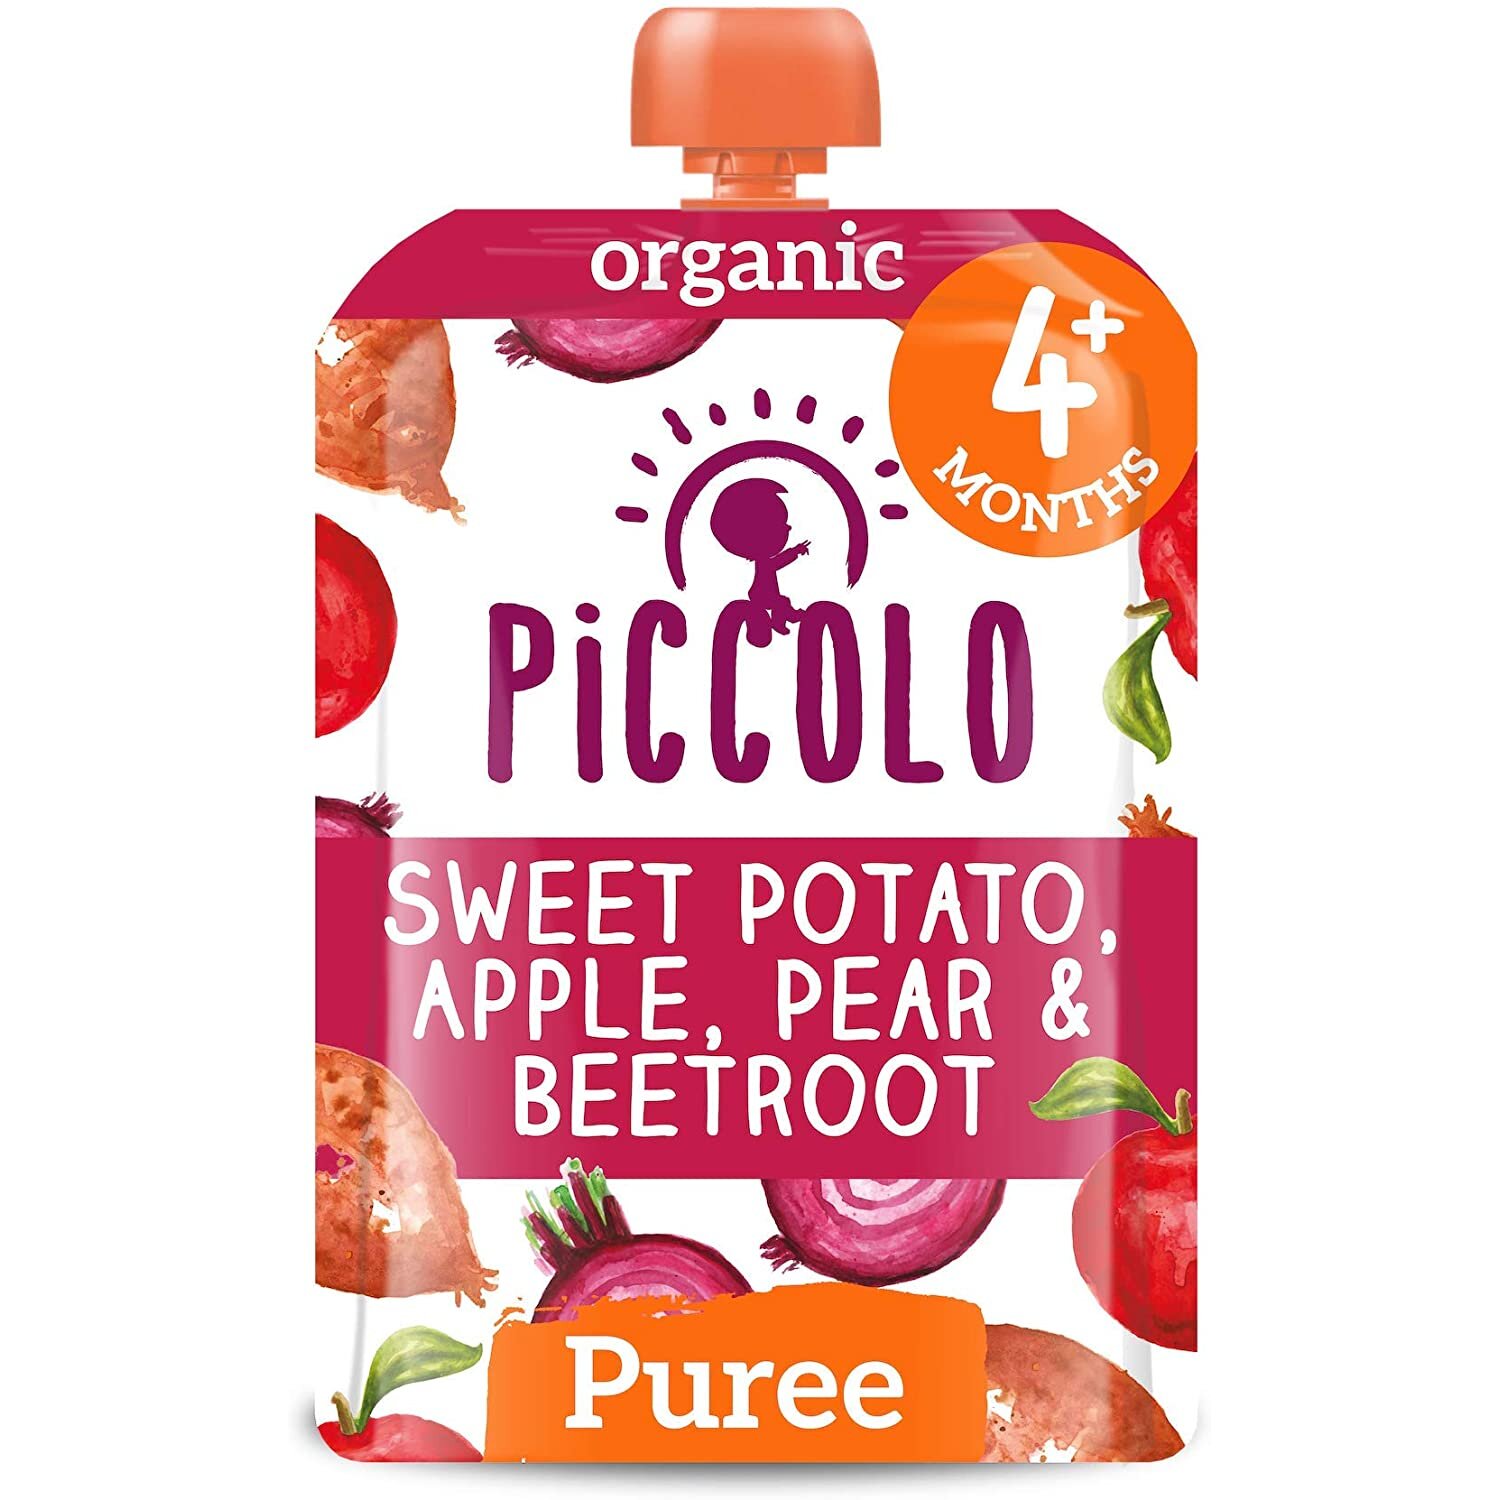 Piccolo Organic a 4 Months+ - Sweet Potato, Beetroot, Apple & Pear Puree a Pack of 5 x 100g a Stage 1 - Gluten & Dairy Free Baby Food